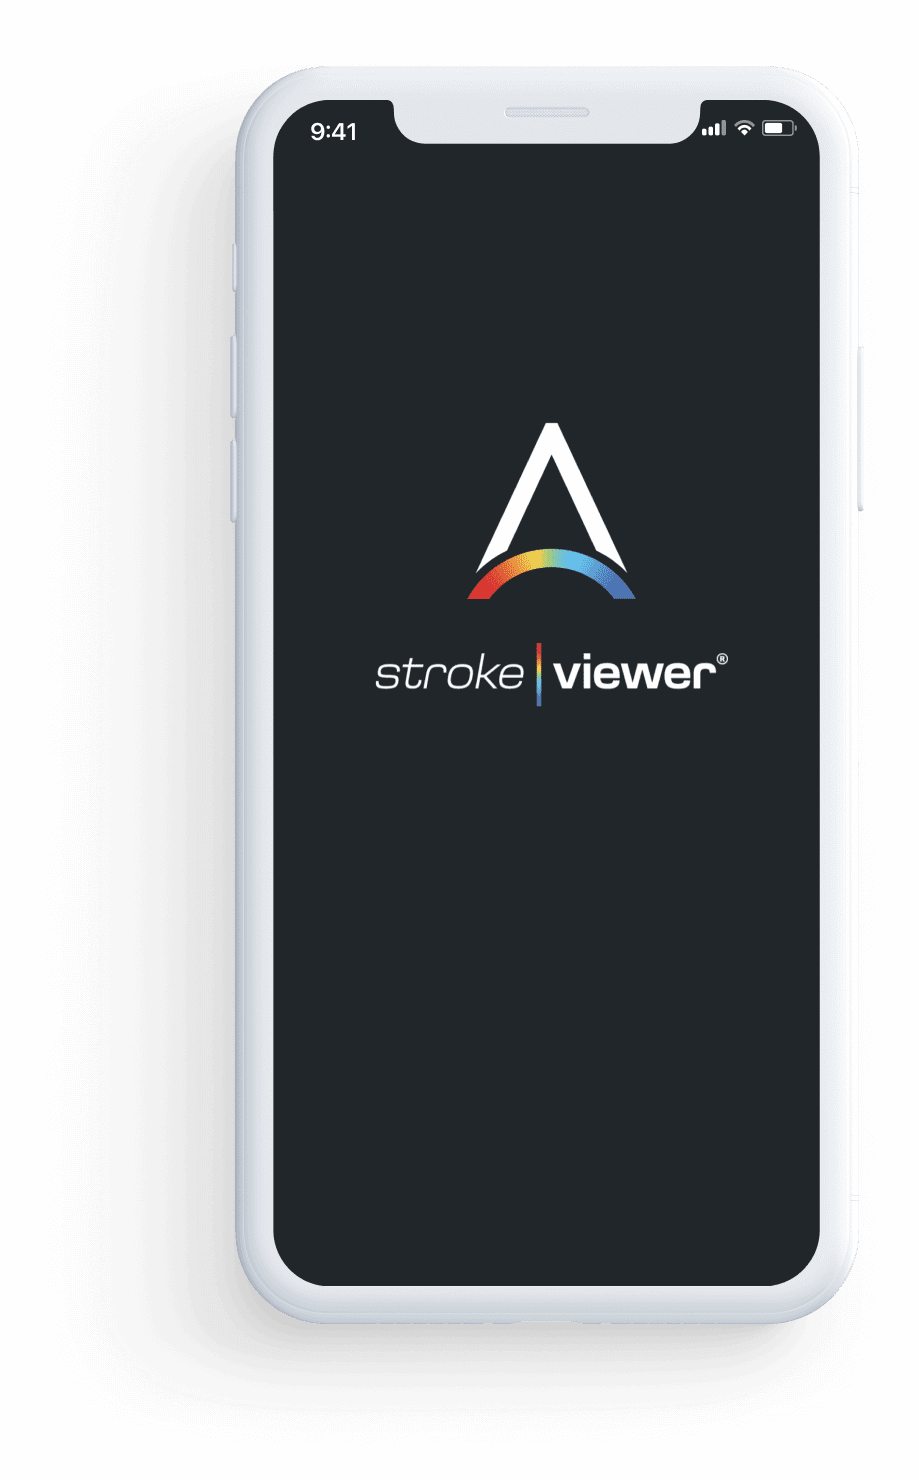 StrokeViewer app homescreen on mobile